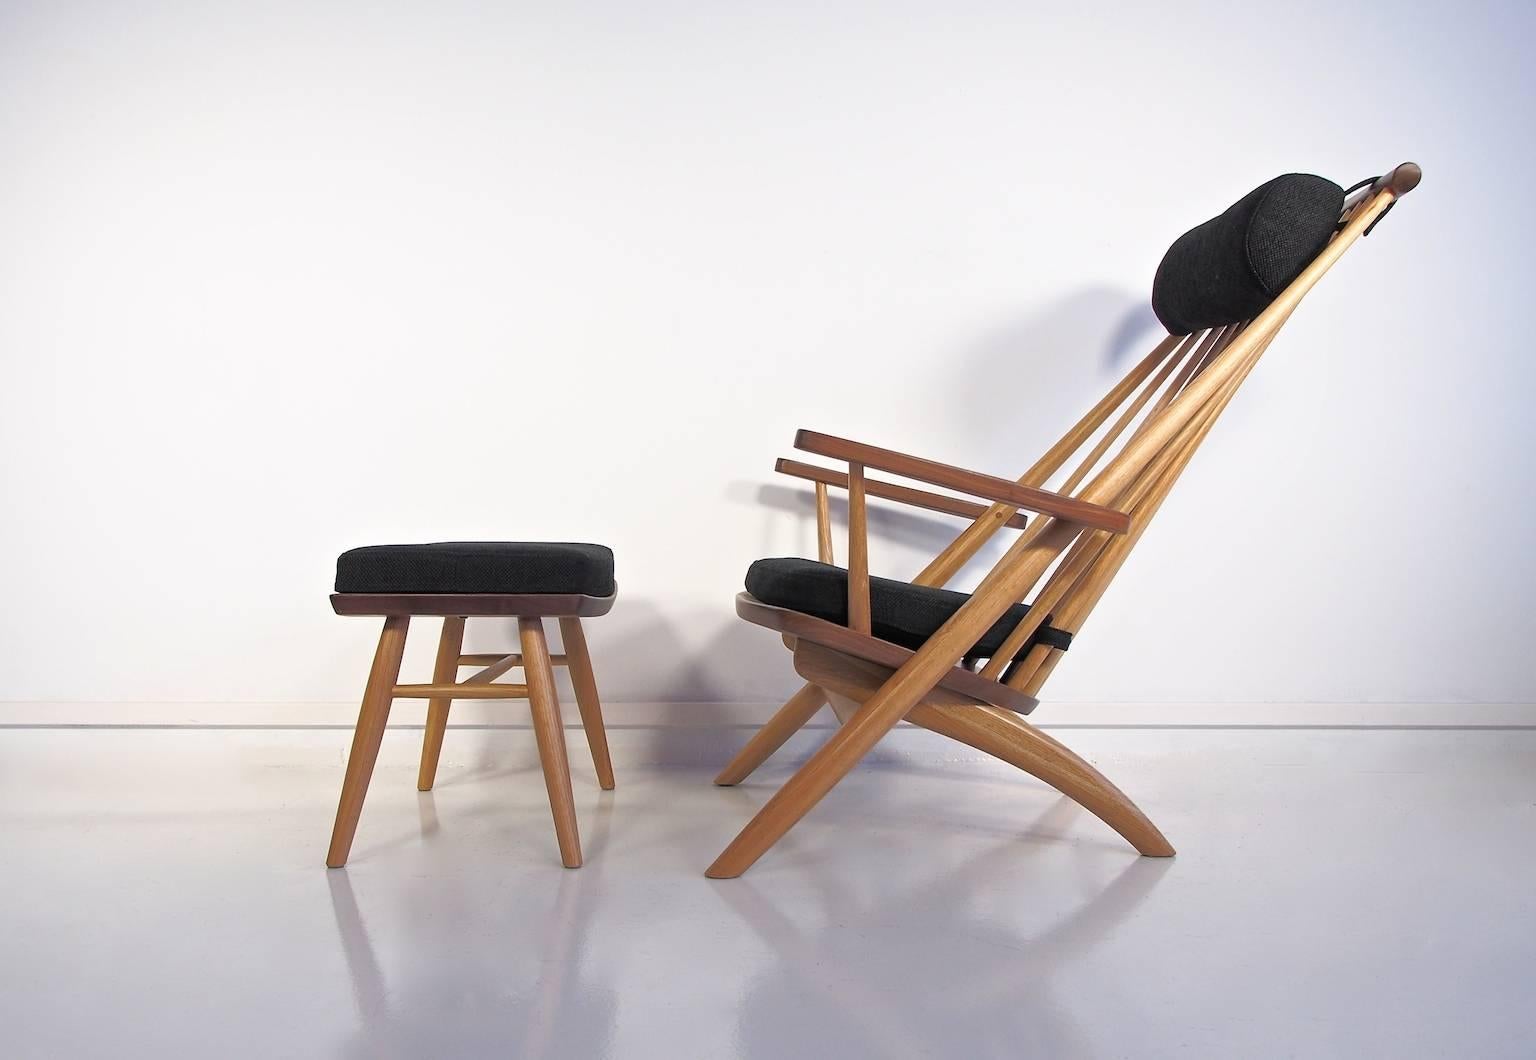 Easy chair and matching foot stool designed by Tateishi Shoiji in the 1950s and produced in Finland in the 2000s. The detachable seat cushion and neck support is upholstered in dark grey fabric. The chair is made of oak with walnut seat, armrests